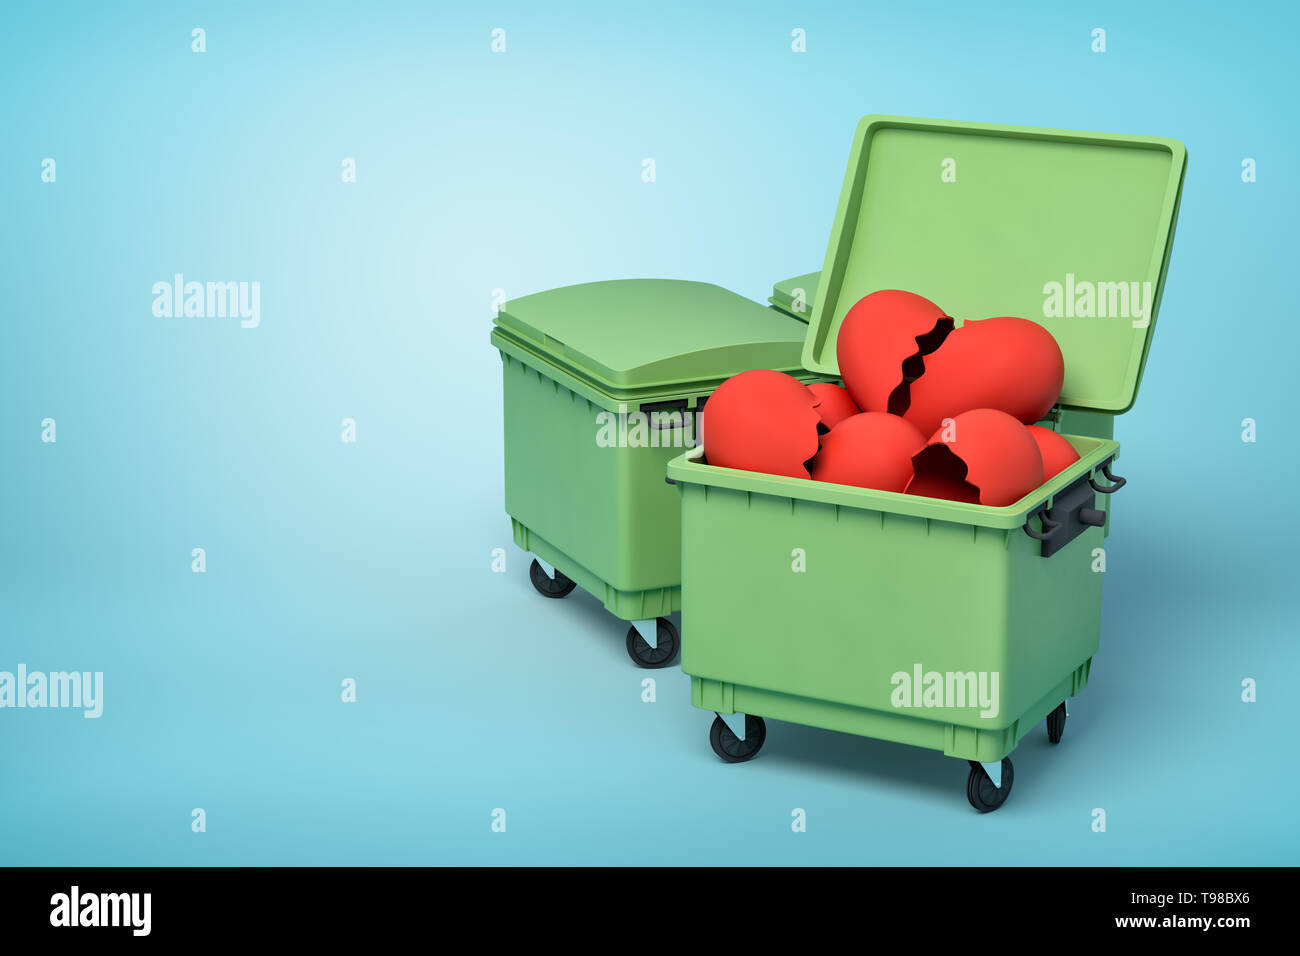 3d rendering of two green trash cans, front can open and full of broken valentine hearts, on light-blue background. Stock Photo